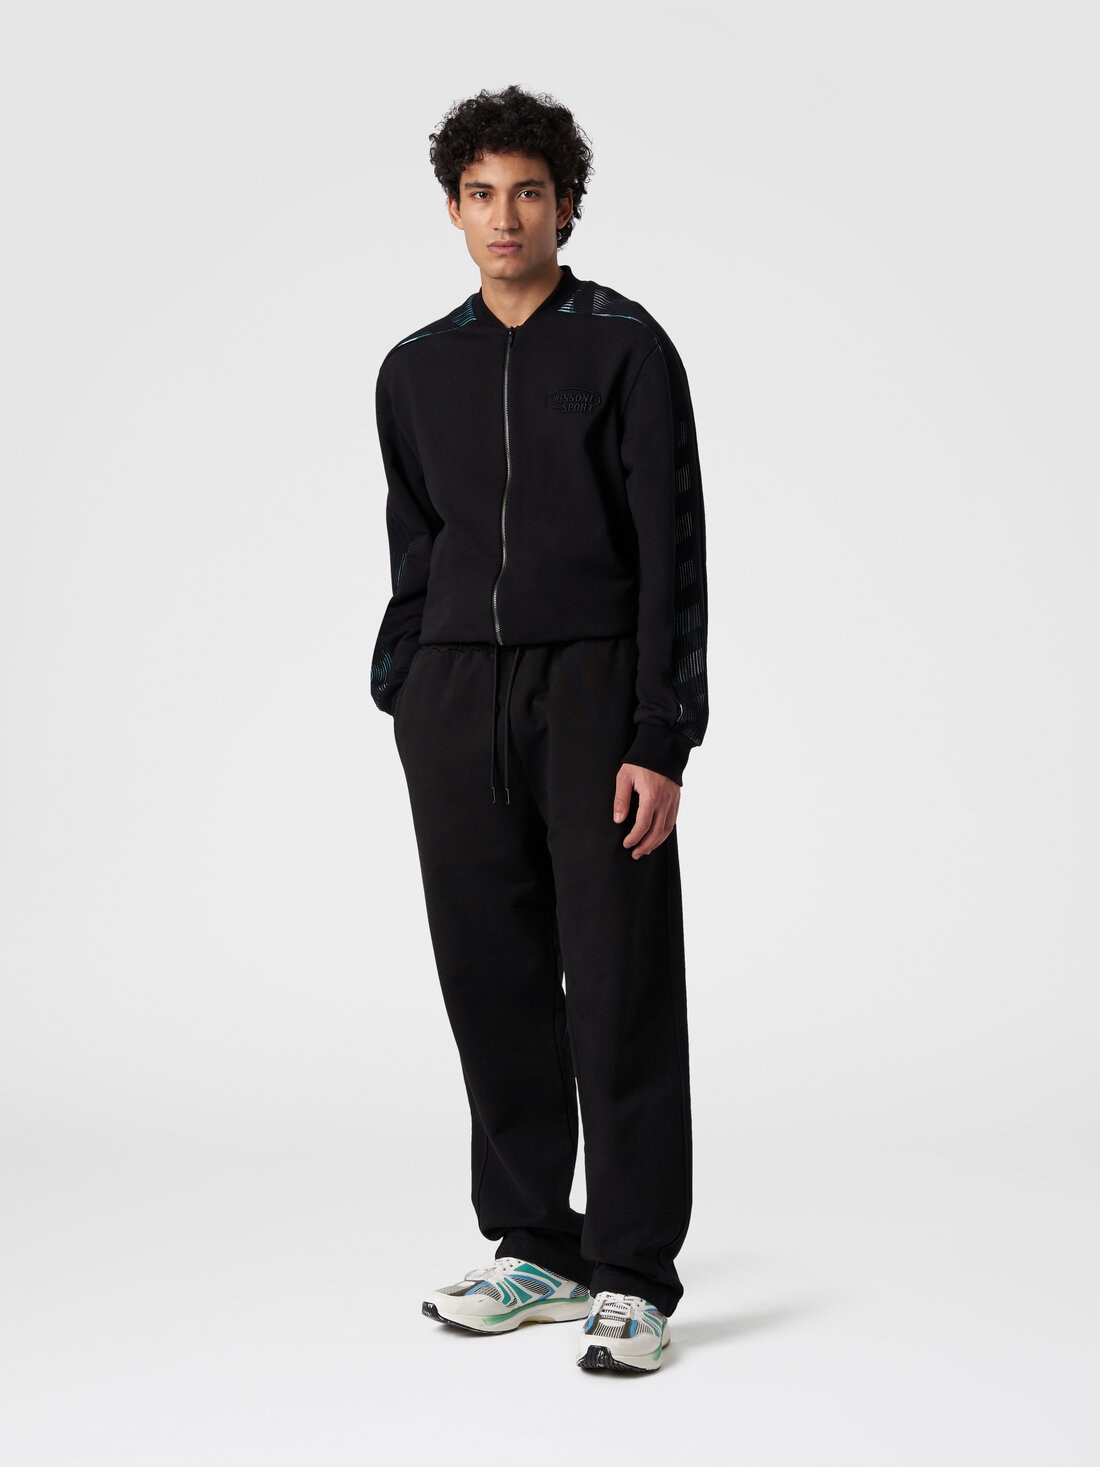 Trousers in cotton fleece with logo, Black    - TS24SI00BJ00H0S91J4 - 1